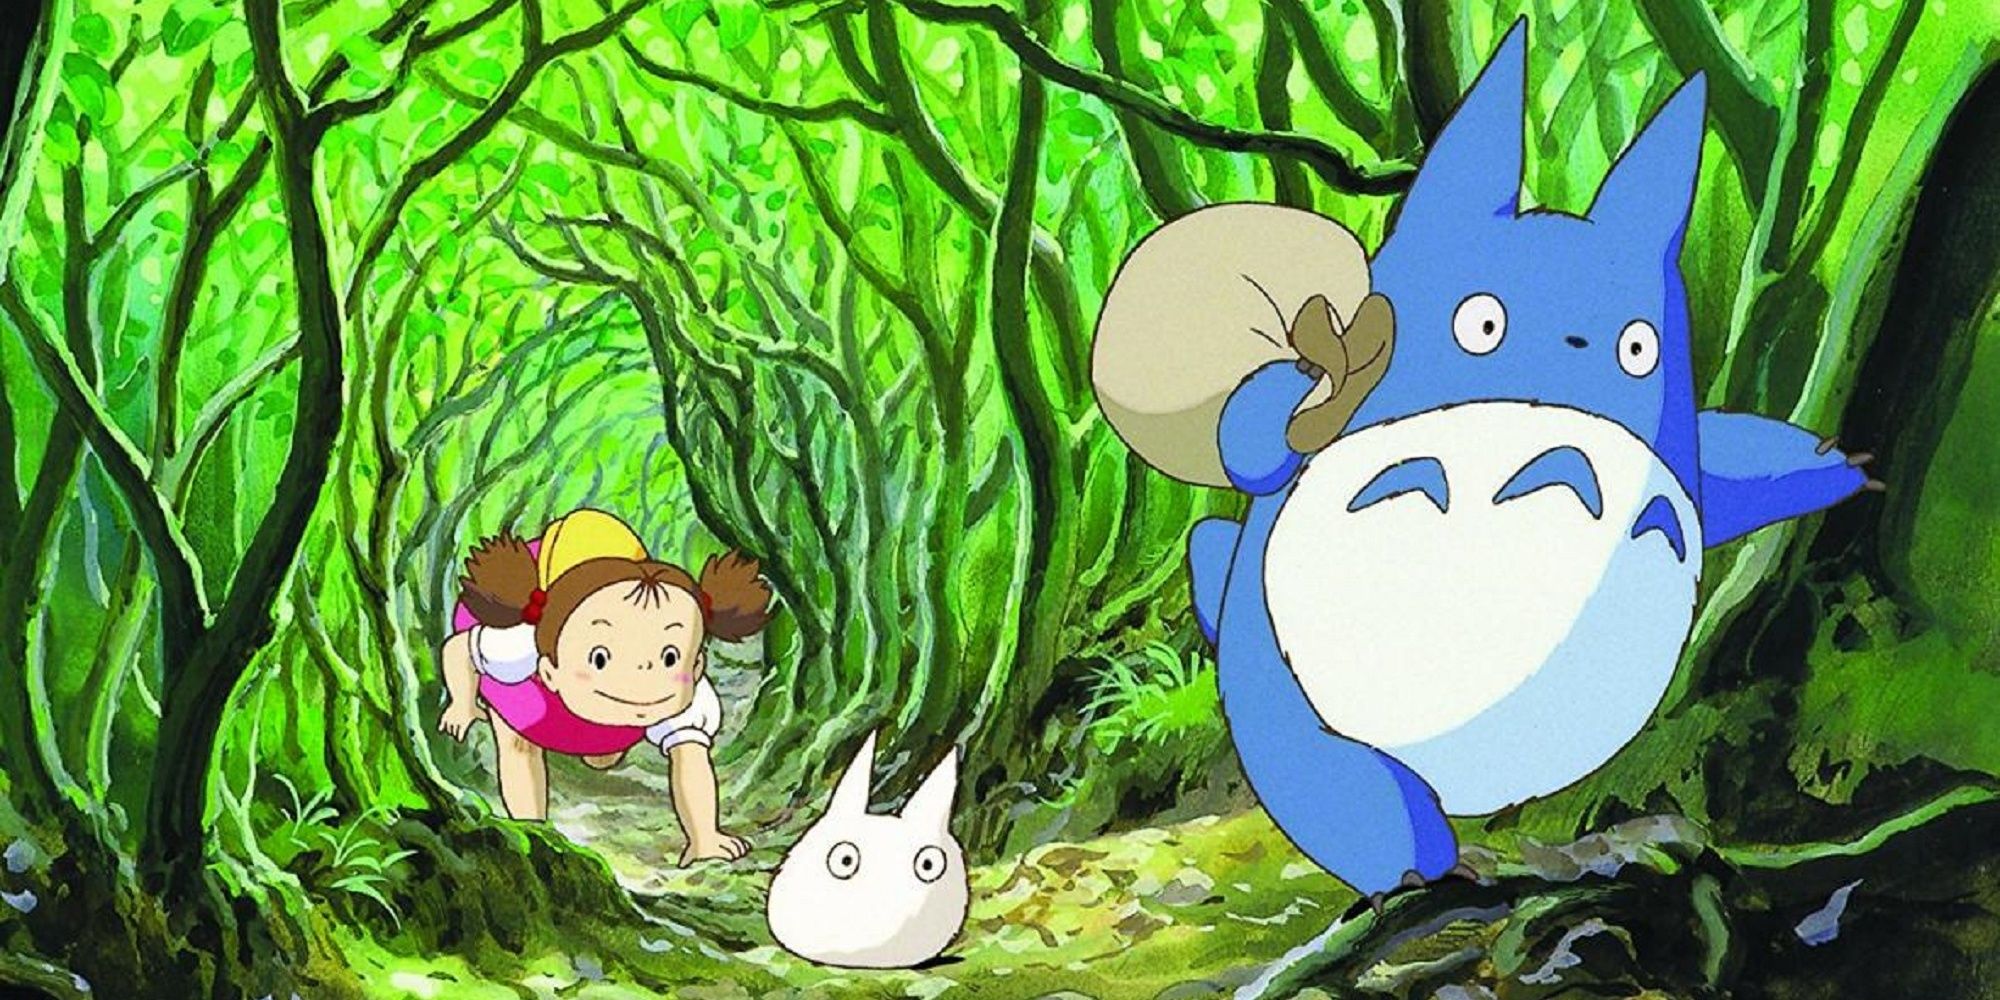 Chu Totoro and Mei running through the forest in My Neighbor Totoro.